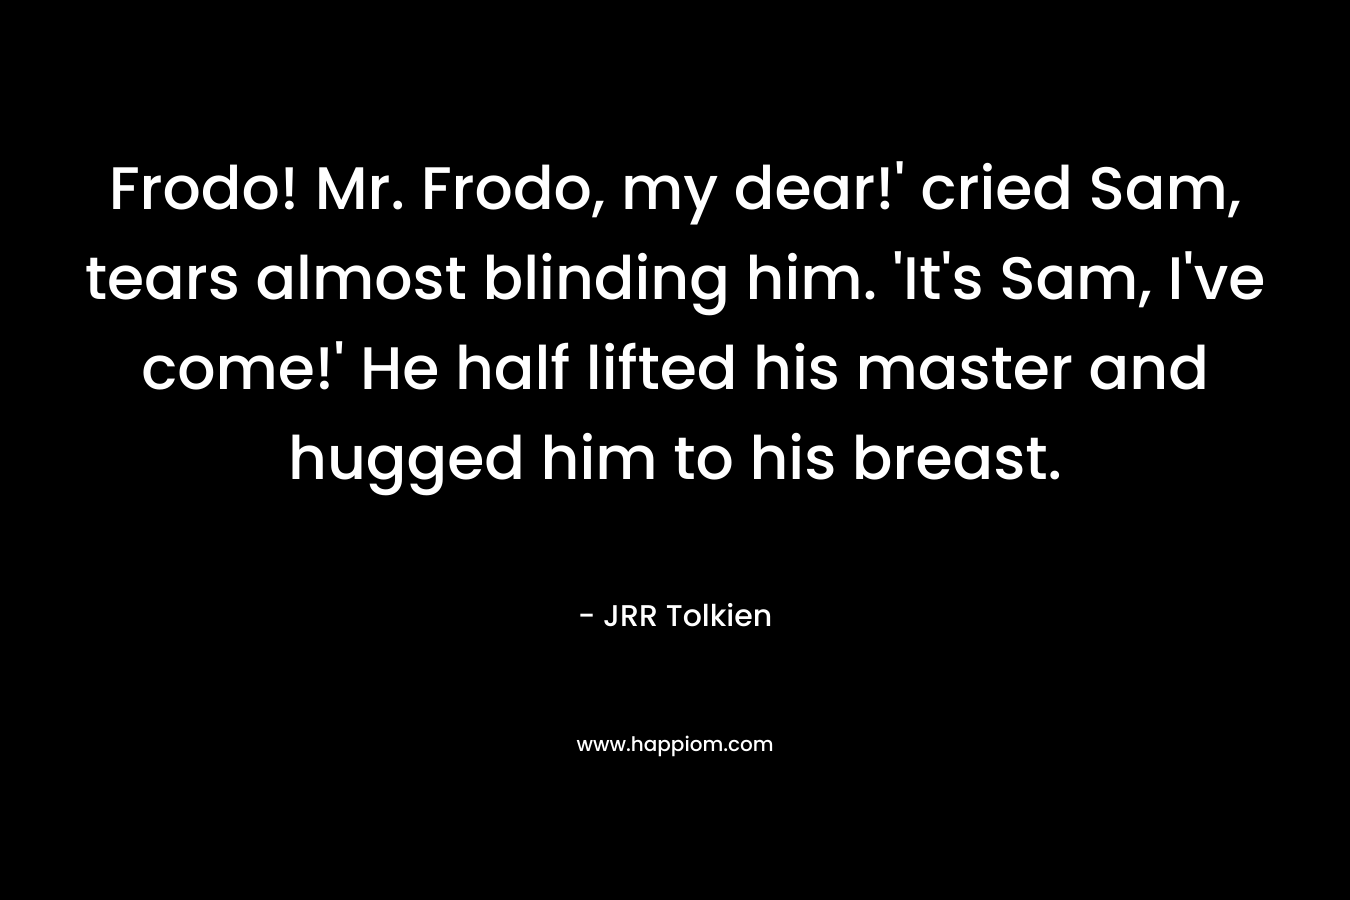 Frodo! Mr. Frodo, my dear!’ cried Sam, tears almost blinding him. ‘It’s Sam, I’ve come!’ He half lifted his master and hugged him to his breast. – JRR Tolkien